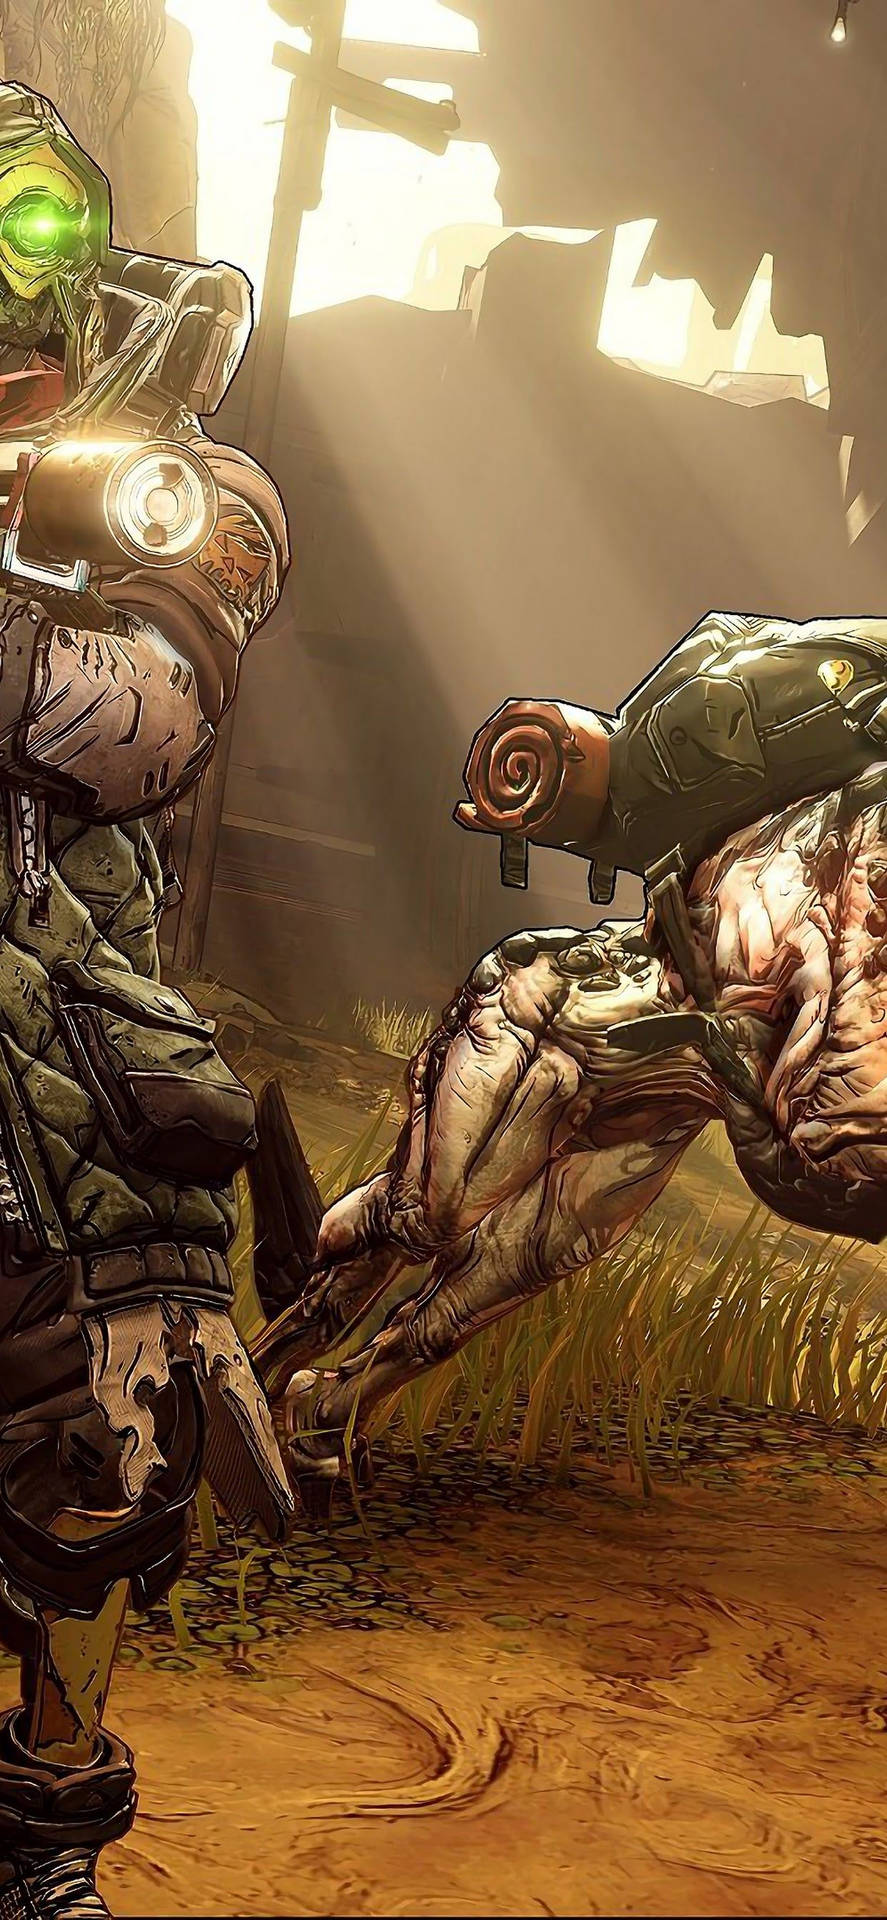 Dive into the action-packed world of Borderlands on your iPhone Wallpaper